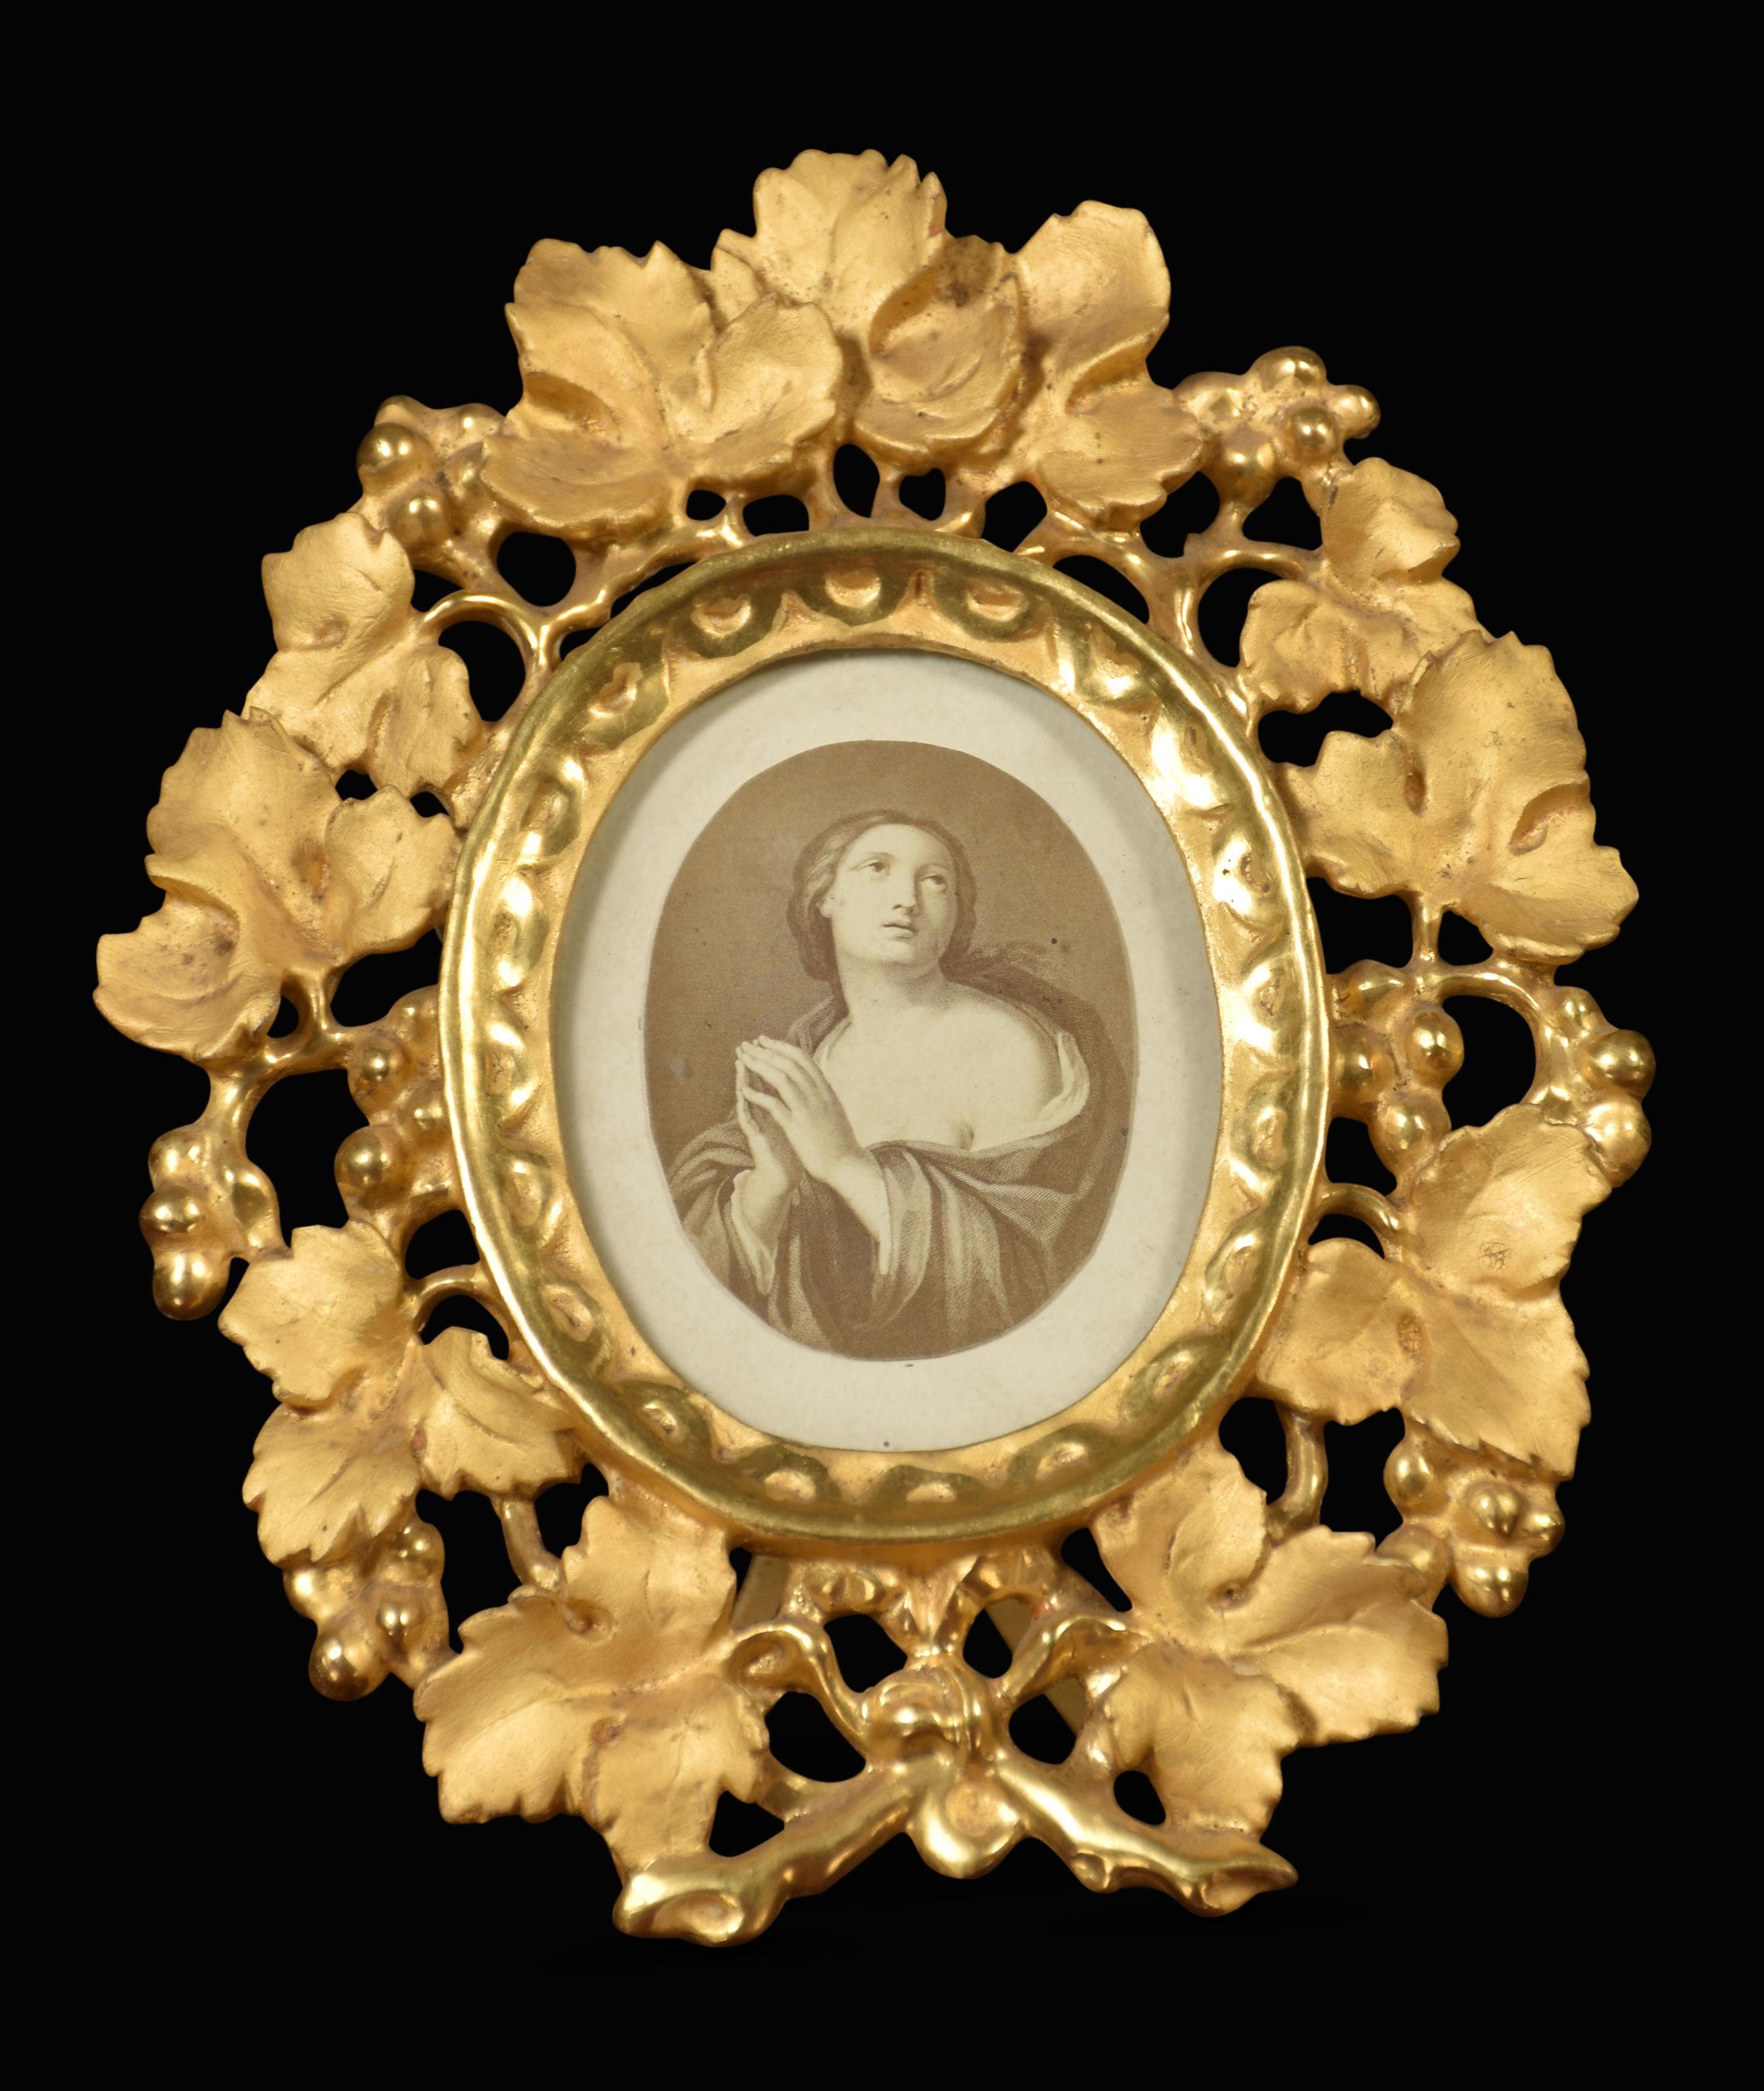 Renaissance Revival giltwood picture encased in scrolling foliating frame enclosing traditional Italian picture.
Dimensions
Height 8.5 Inches
Width 7 Inches
Depth 1 Inch.